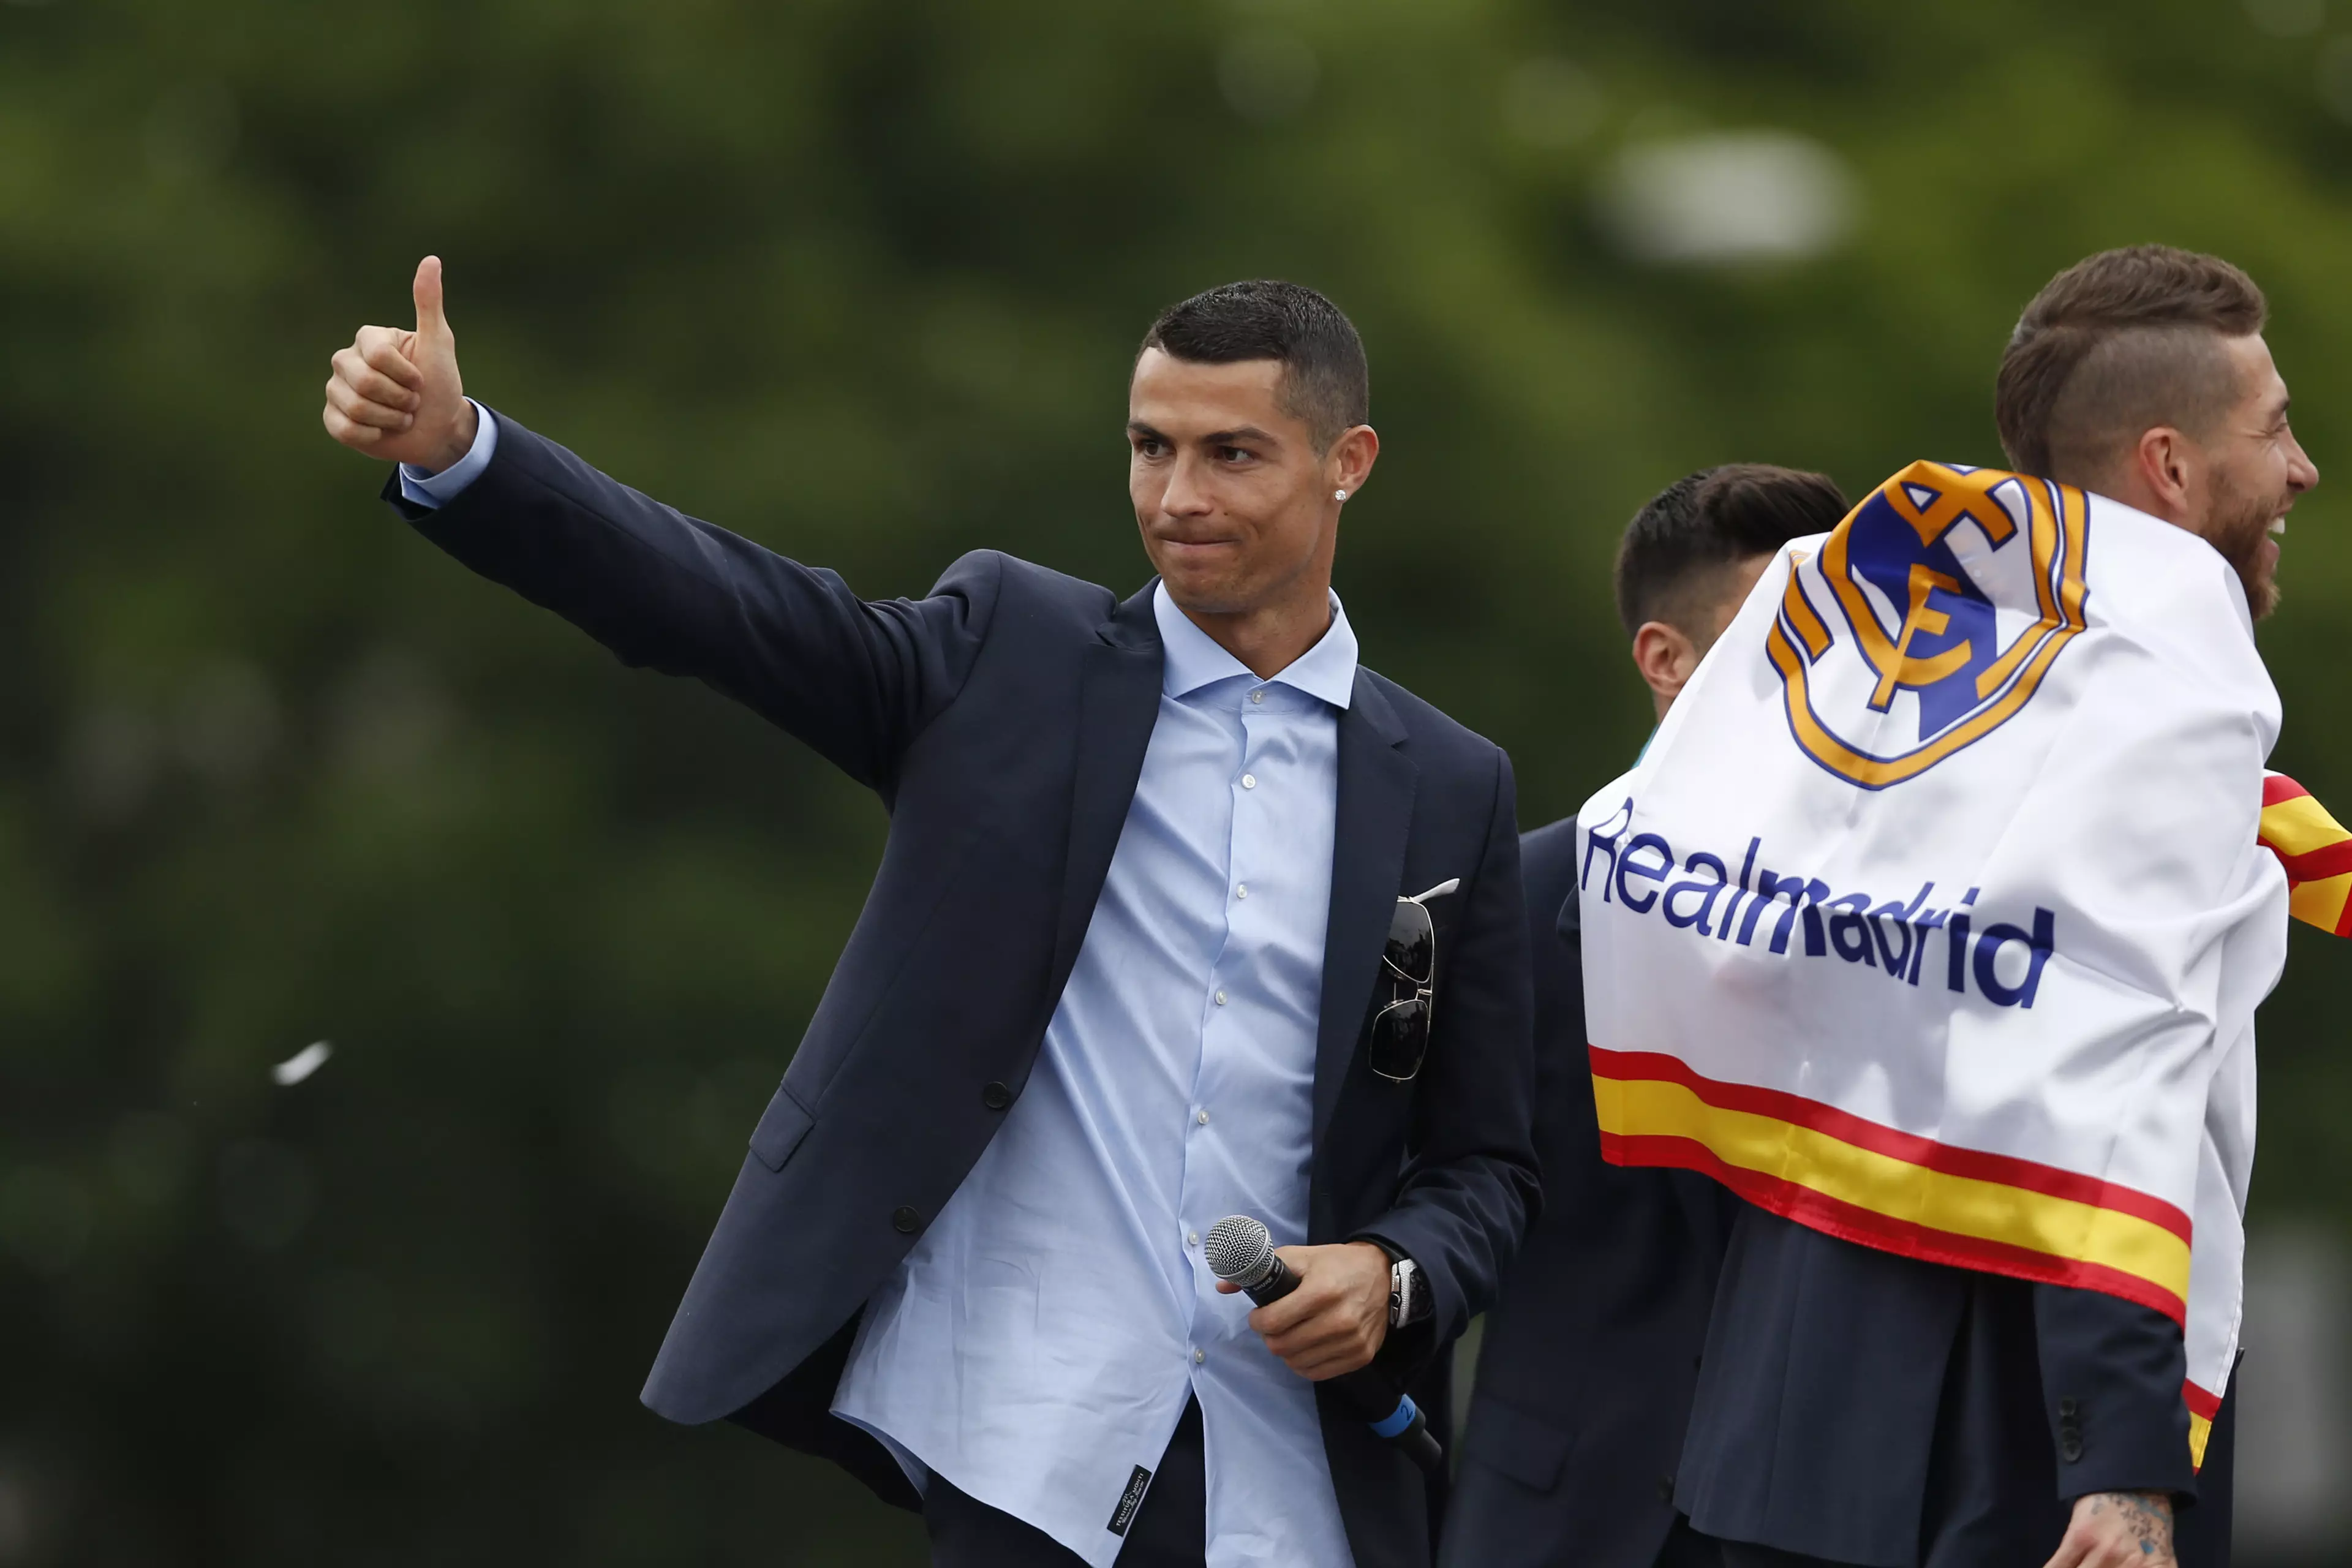 Thumbs up from Ronaldo. Image: PA